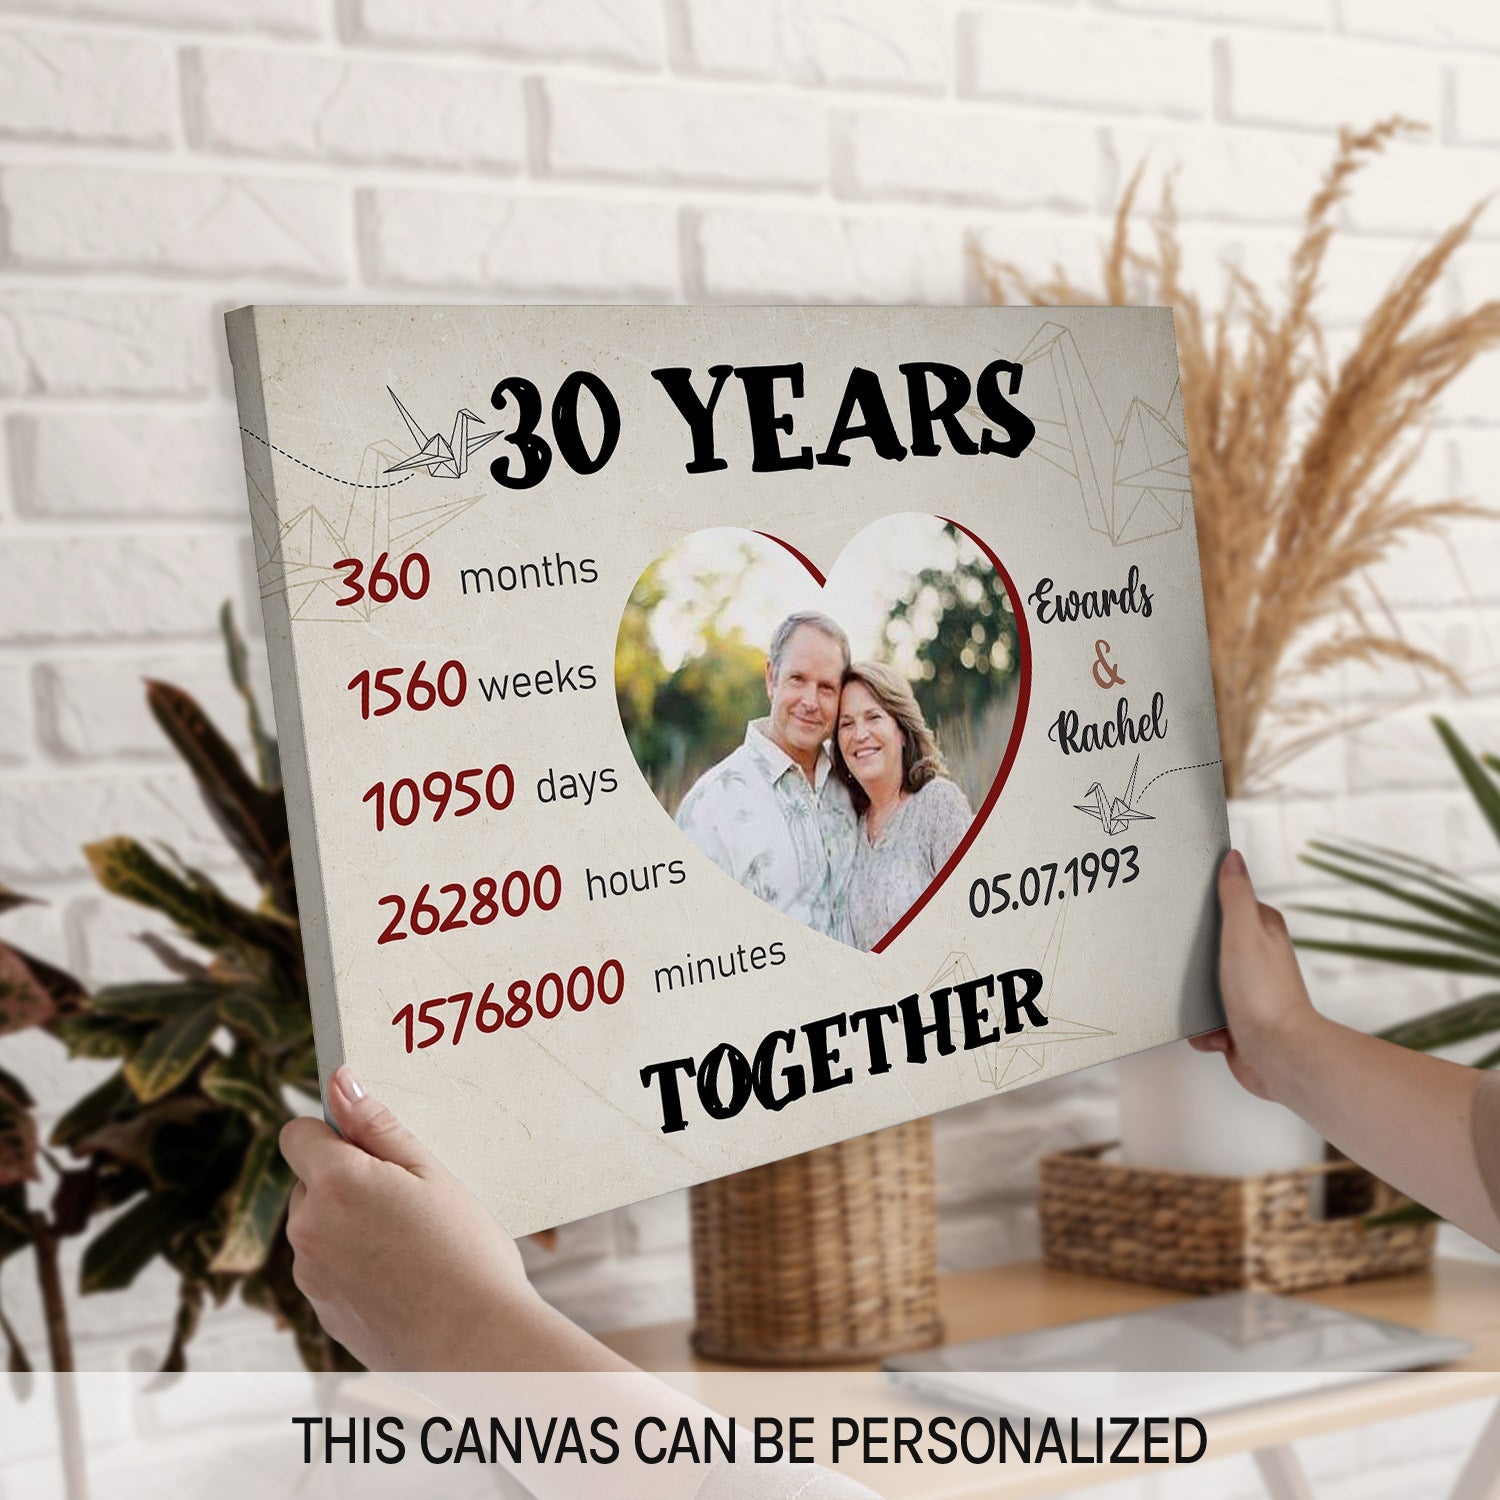 30 Years Together - Personalized 30 Year Anniversary gift for him for her - Custom Canvas - MyMindfulGifts